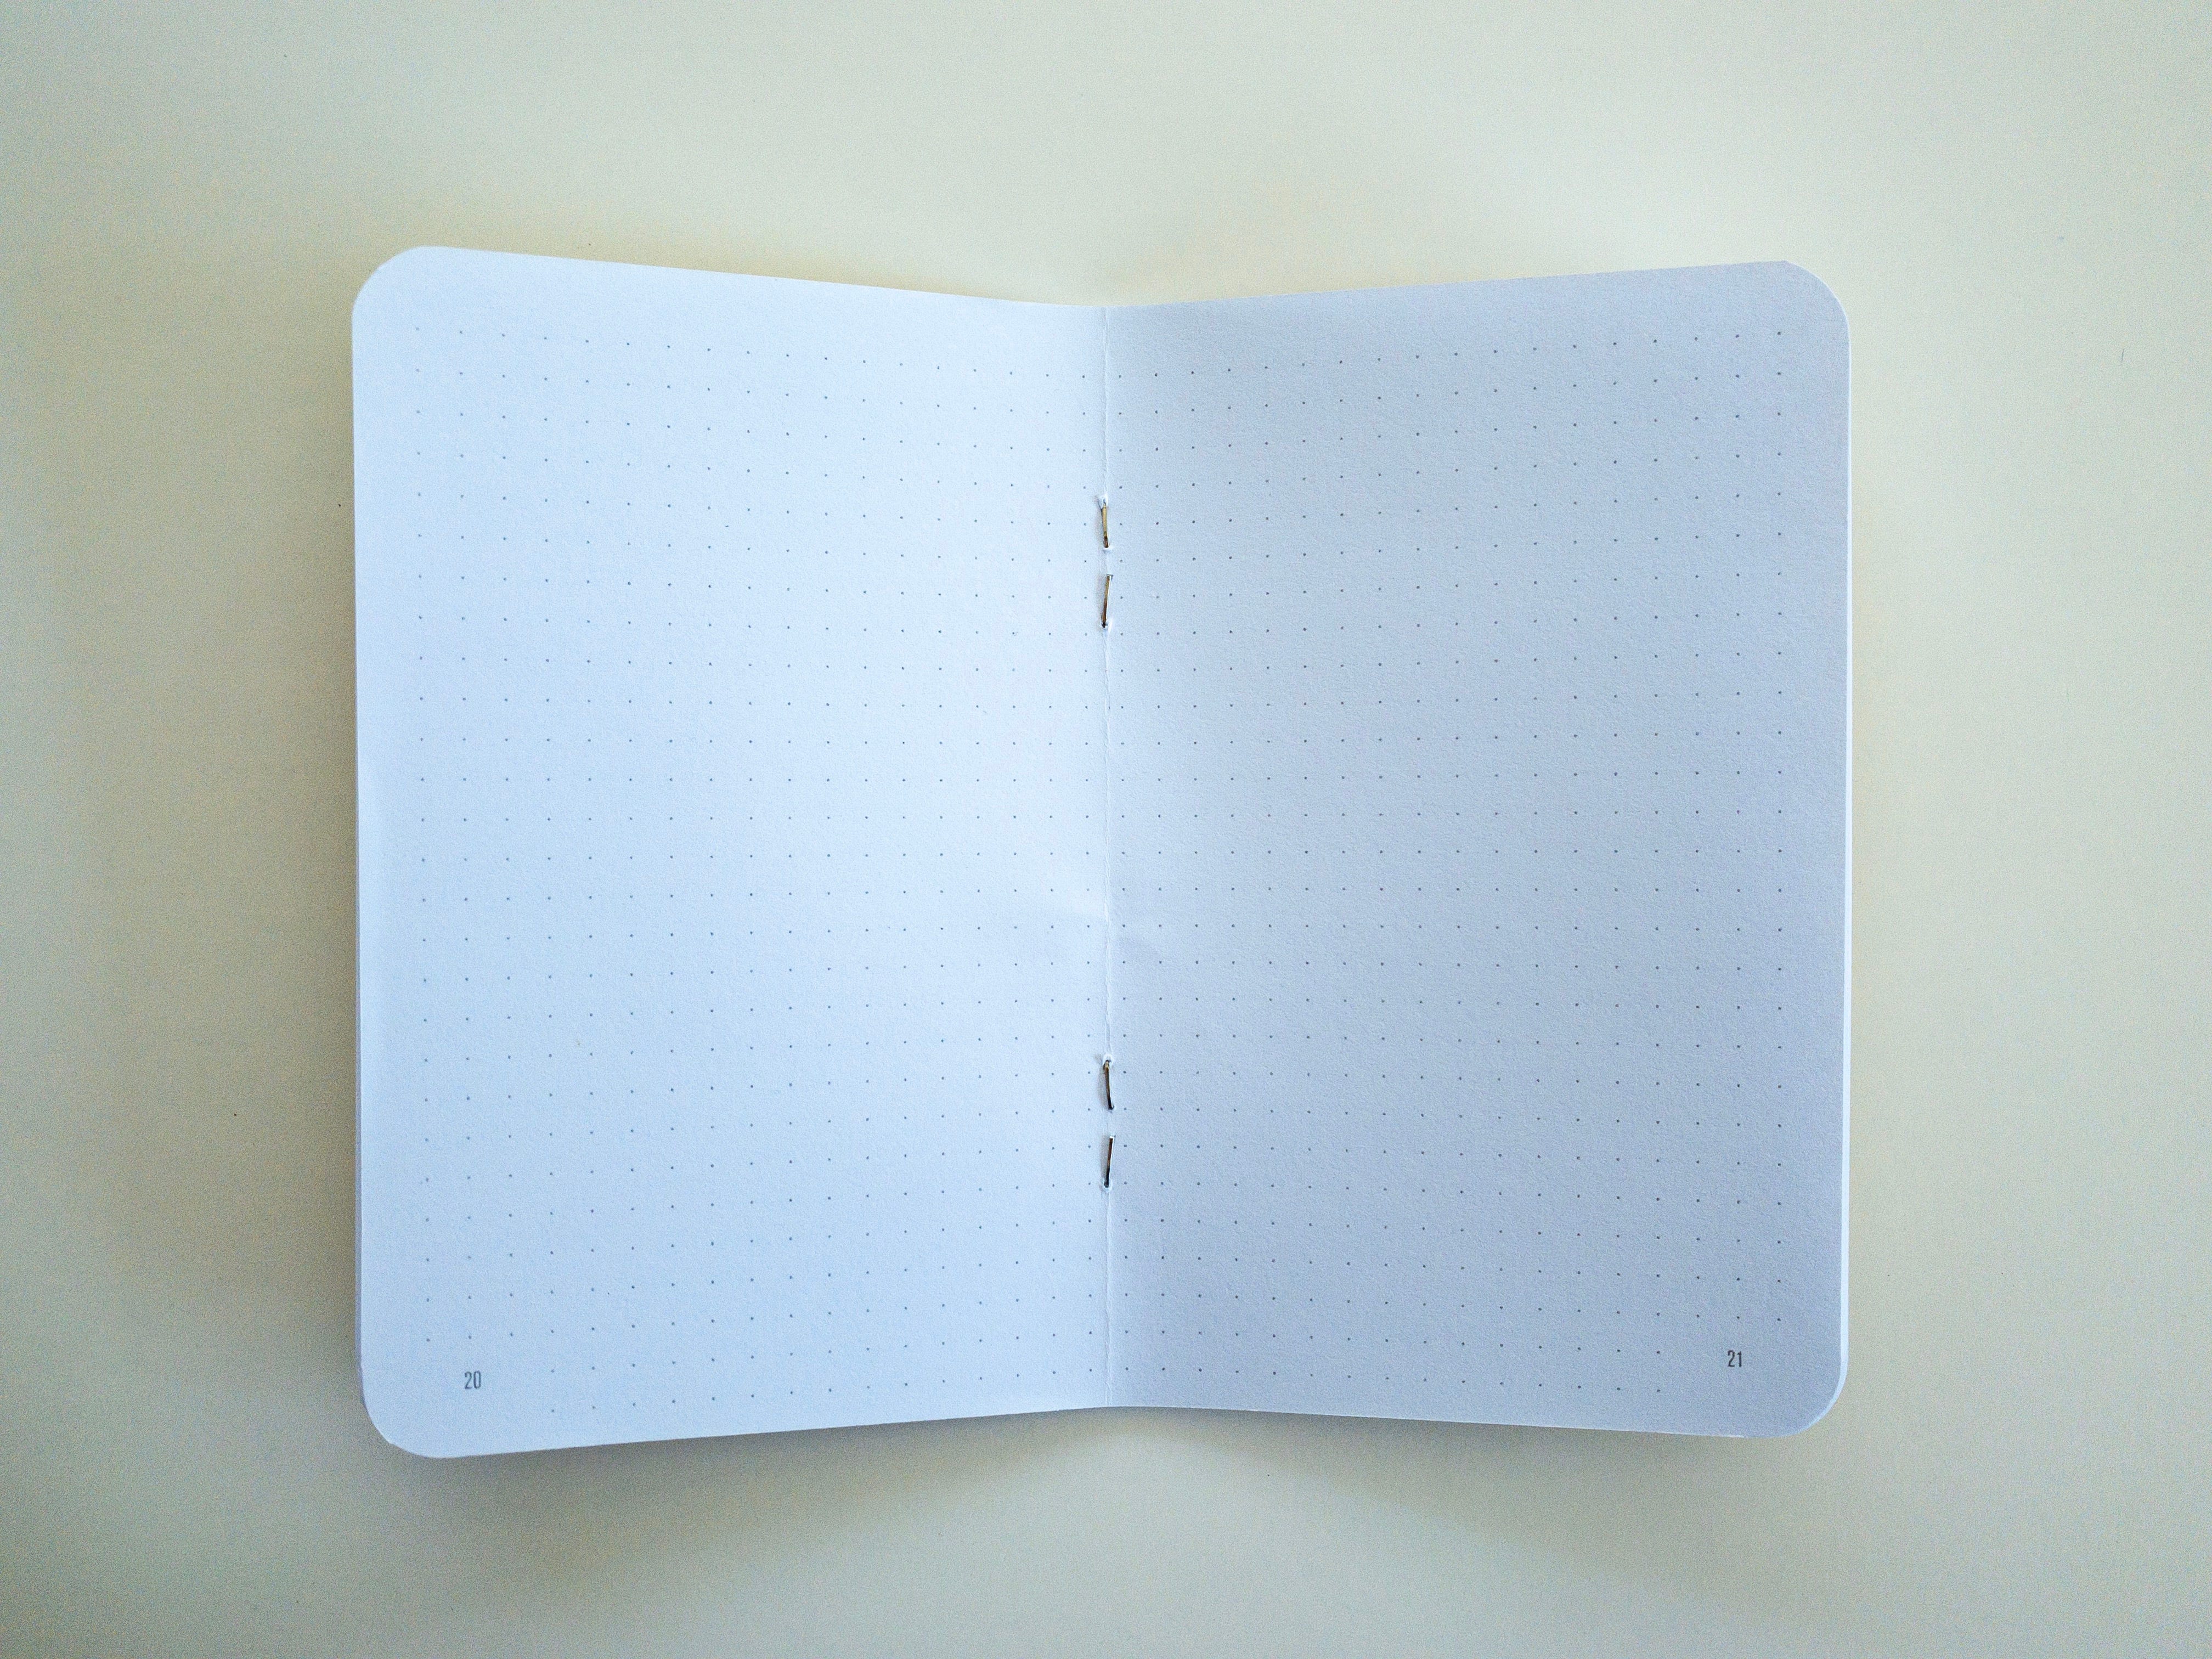 Obsessed: Bullet Journals. A simple task management system for…, by Ryan  Ludman